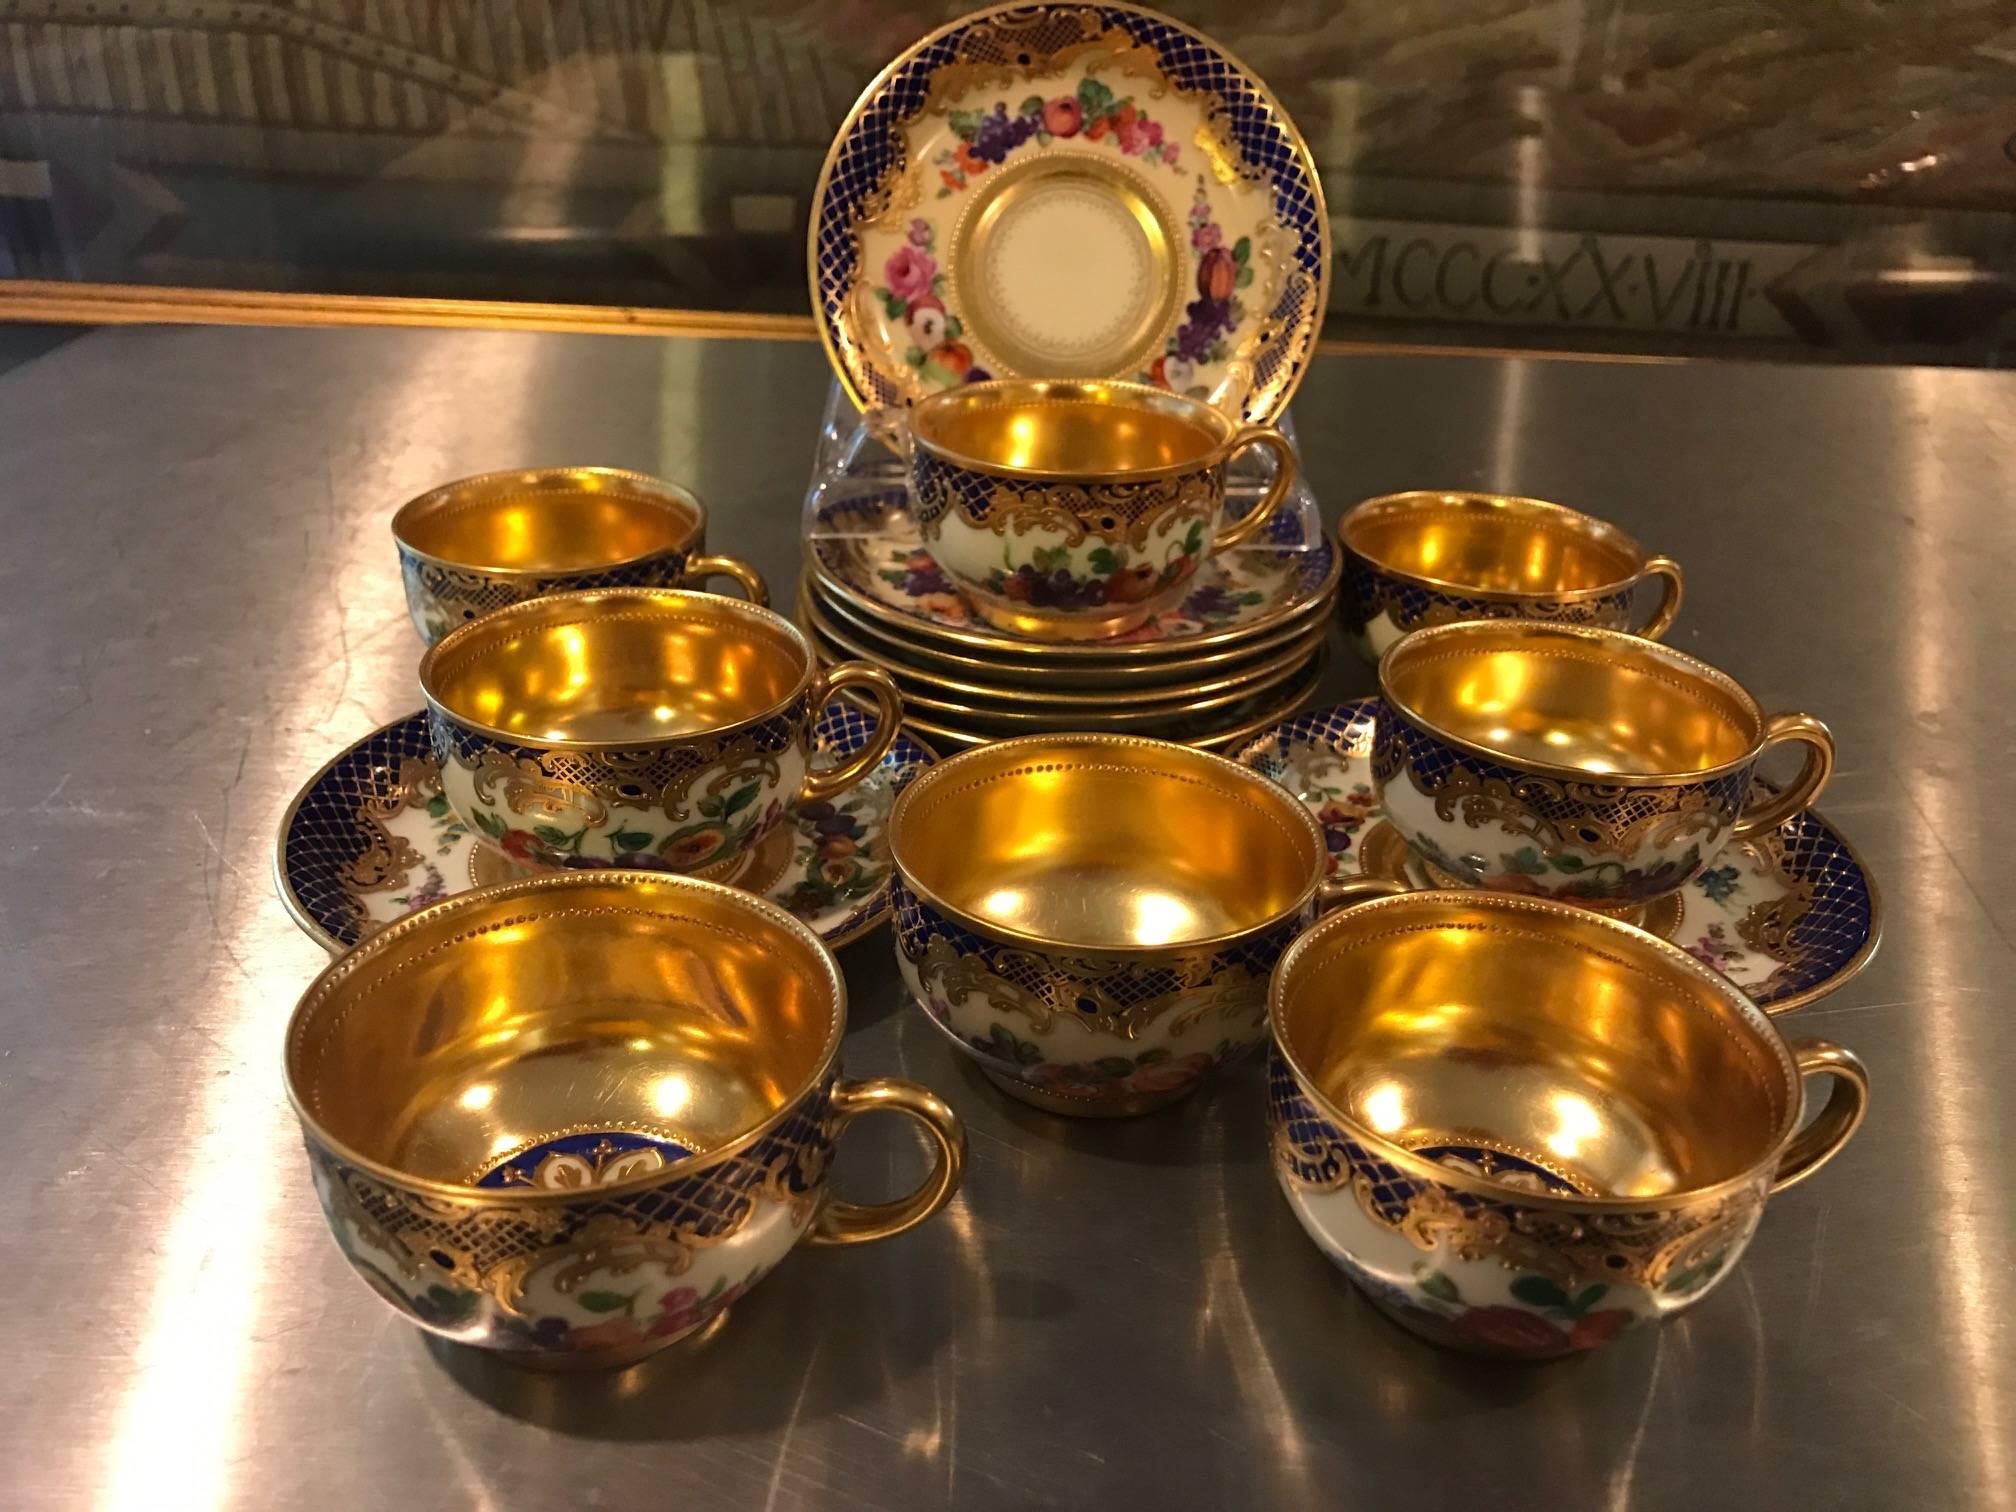 A set of eight espresso cups and saucers with hand-painted and gilt decoration. Exceptional quality and highly skilled artistic detail. These are painted by the best artist available at the time, Ambrosius Lamm.
Has blue overglaze with gold rose